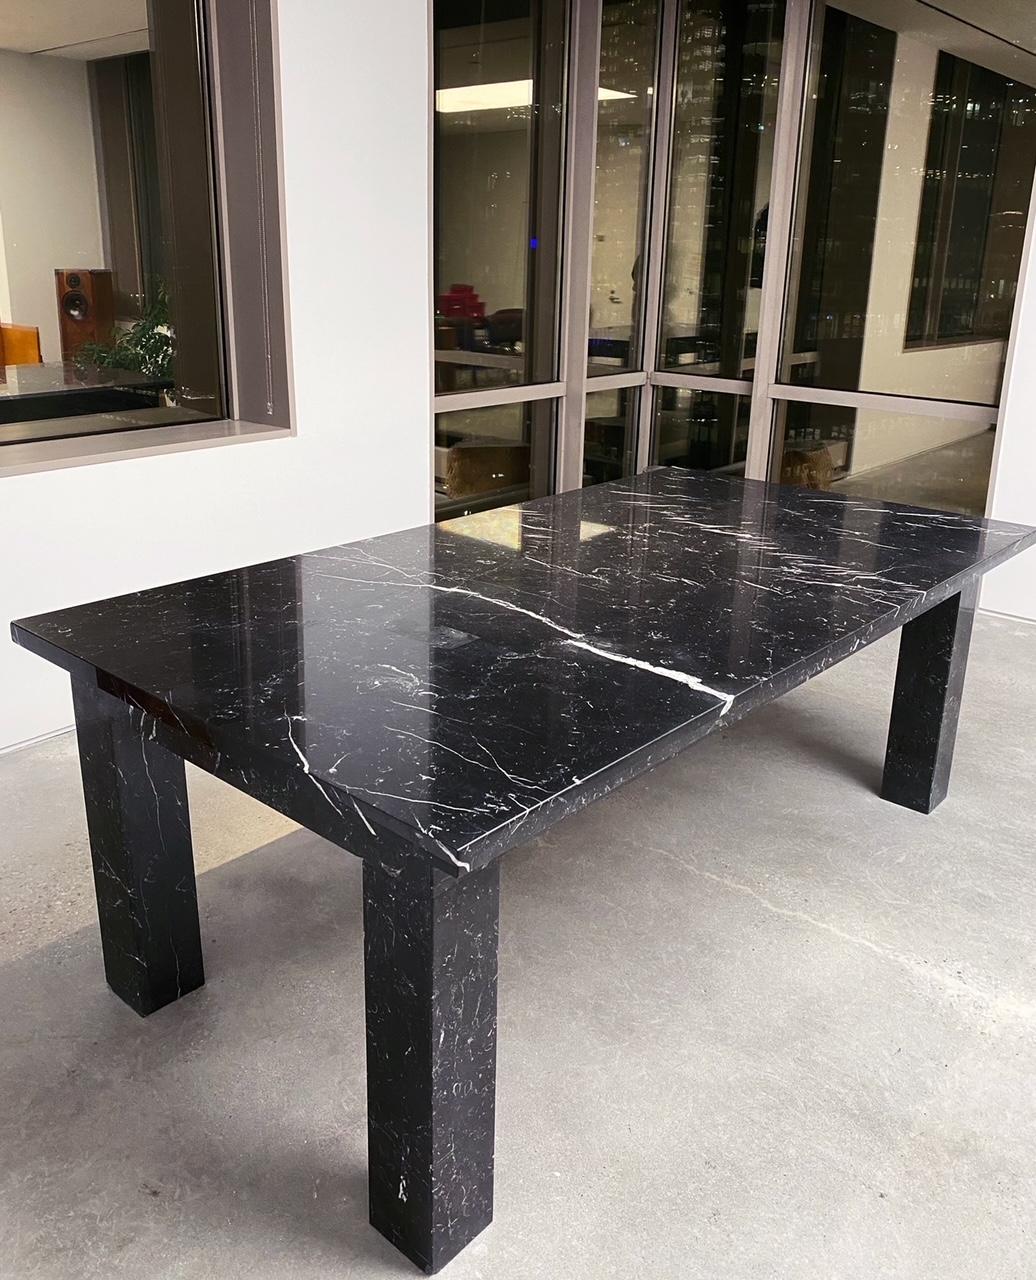 Beautiful black and white custom marble conference dining table, 2000s

Thick and beautiful. Was custom made for a high end fashion showroom. Black with marble veining throughout. Thick solid and heavy.